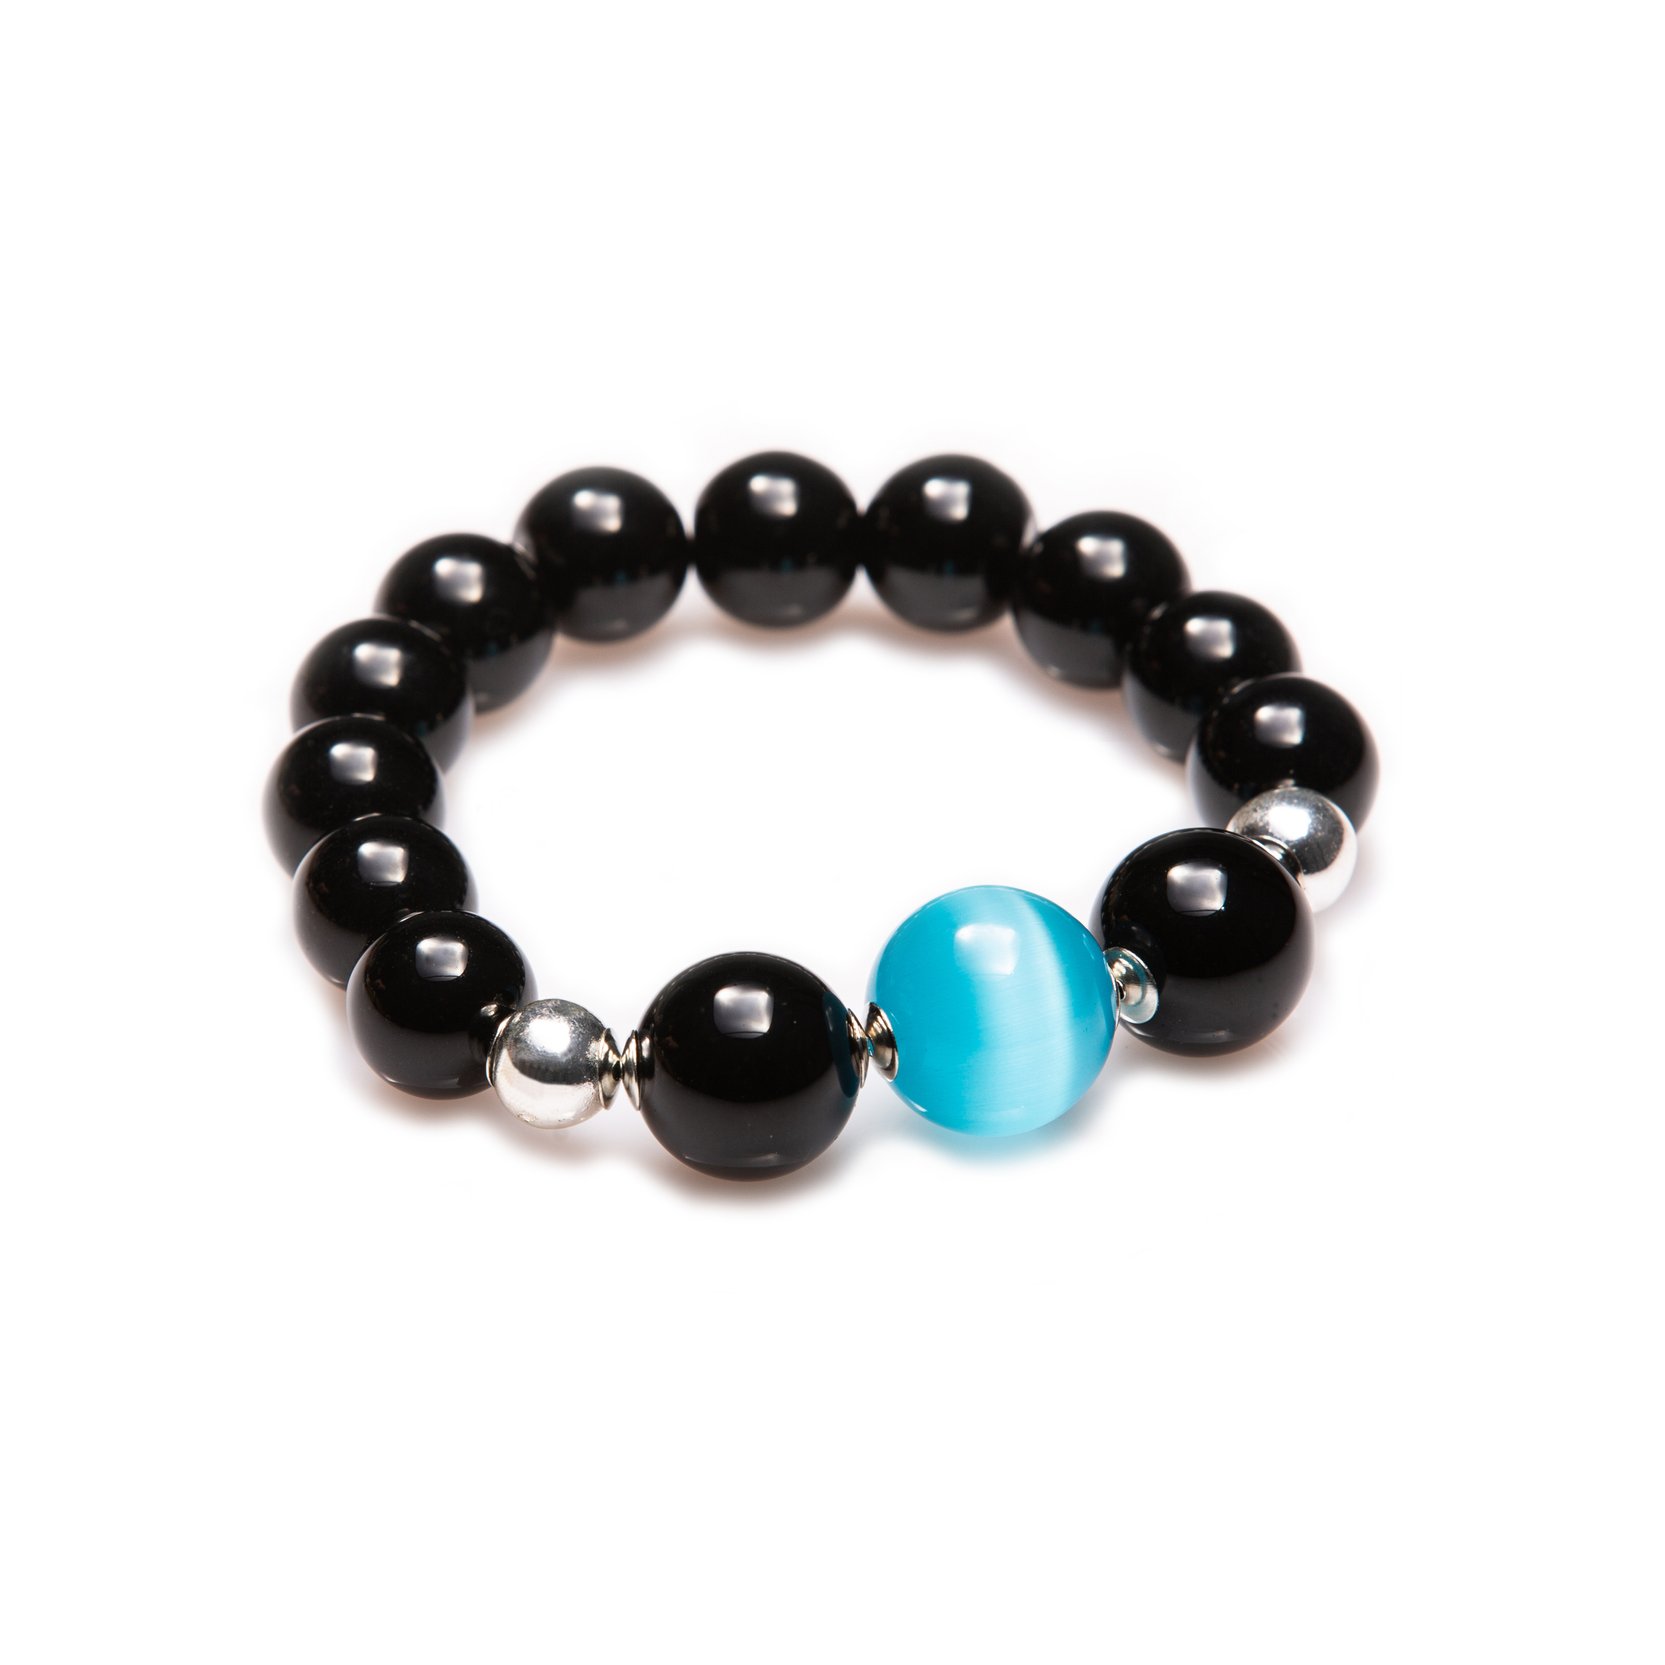 An irresistible bracelet with black agates and a blue stone.